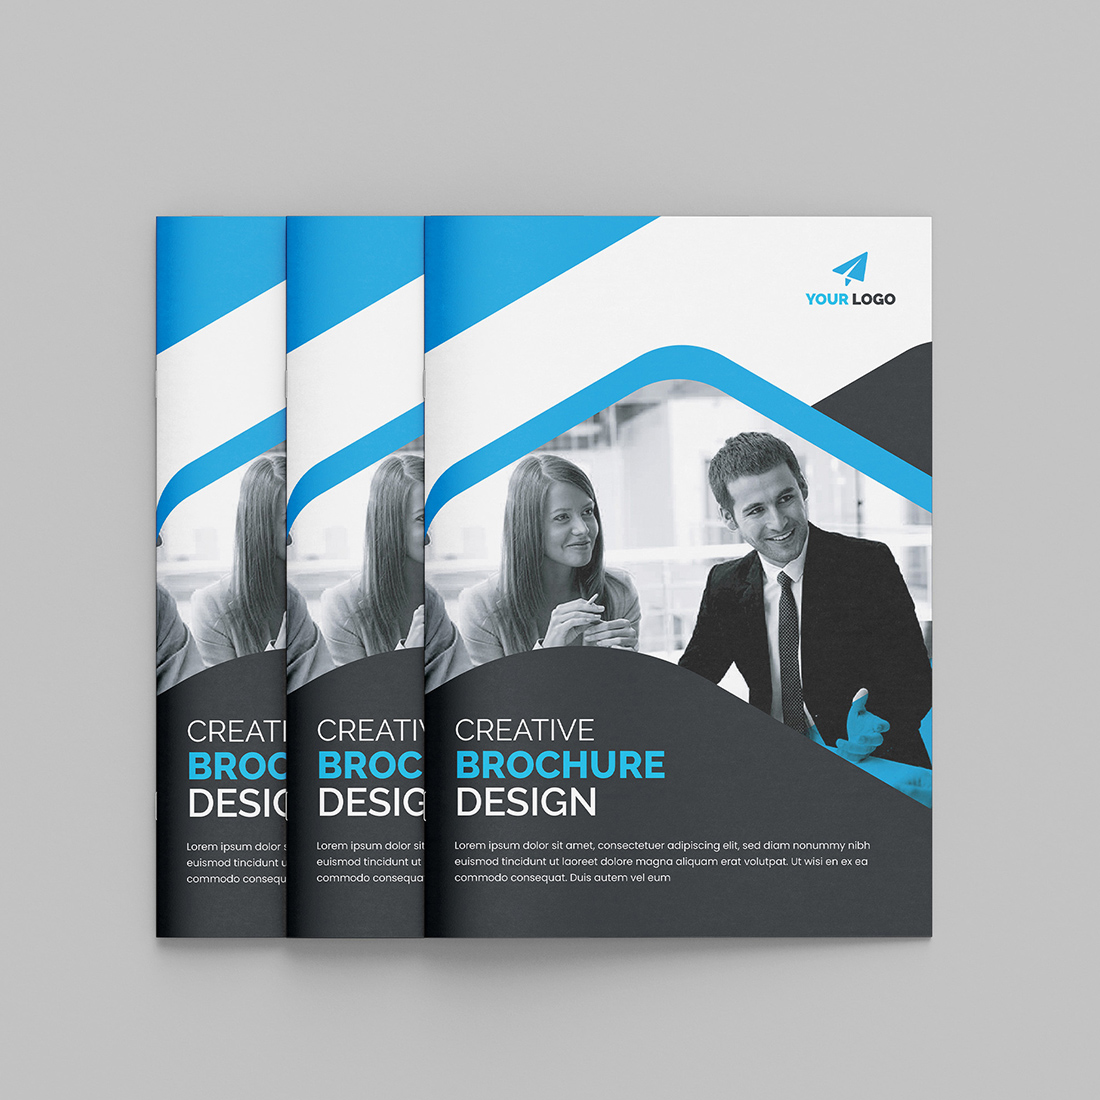 Image of a brochure with an elegant design